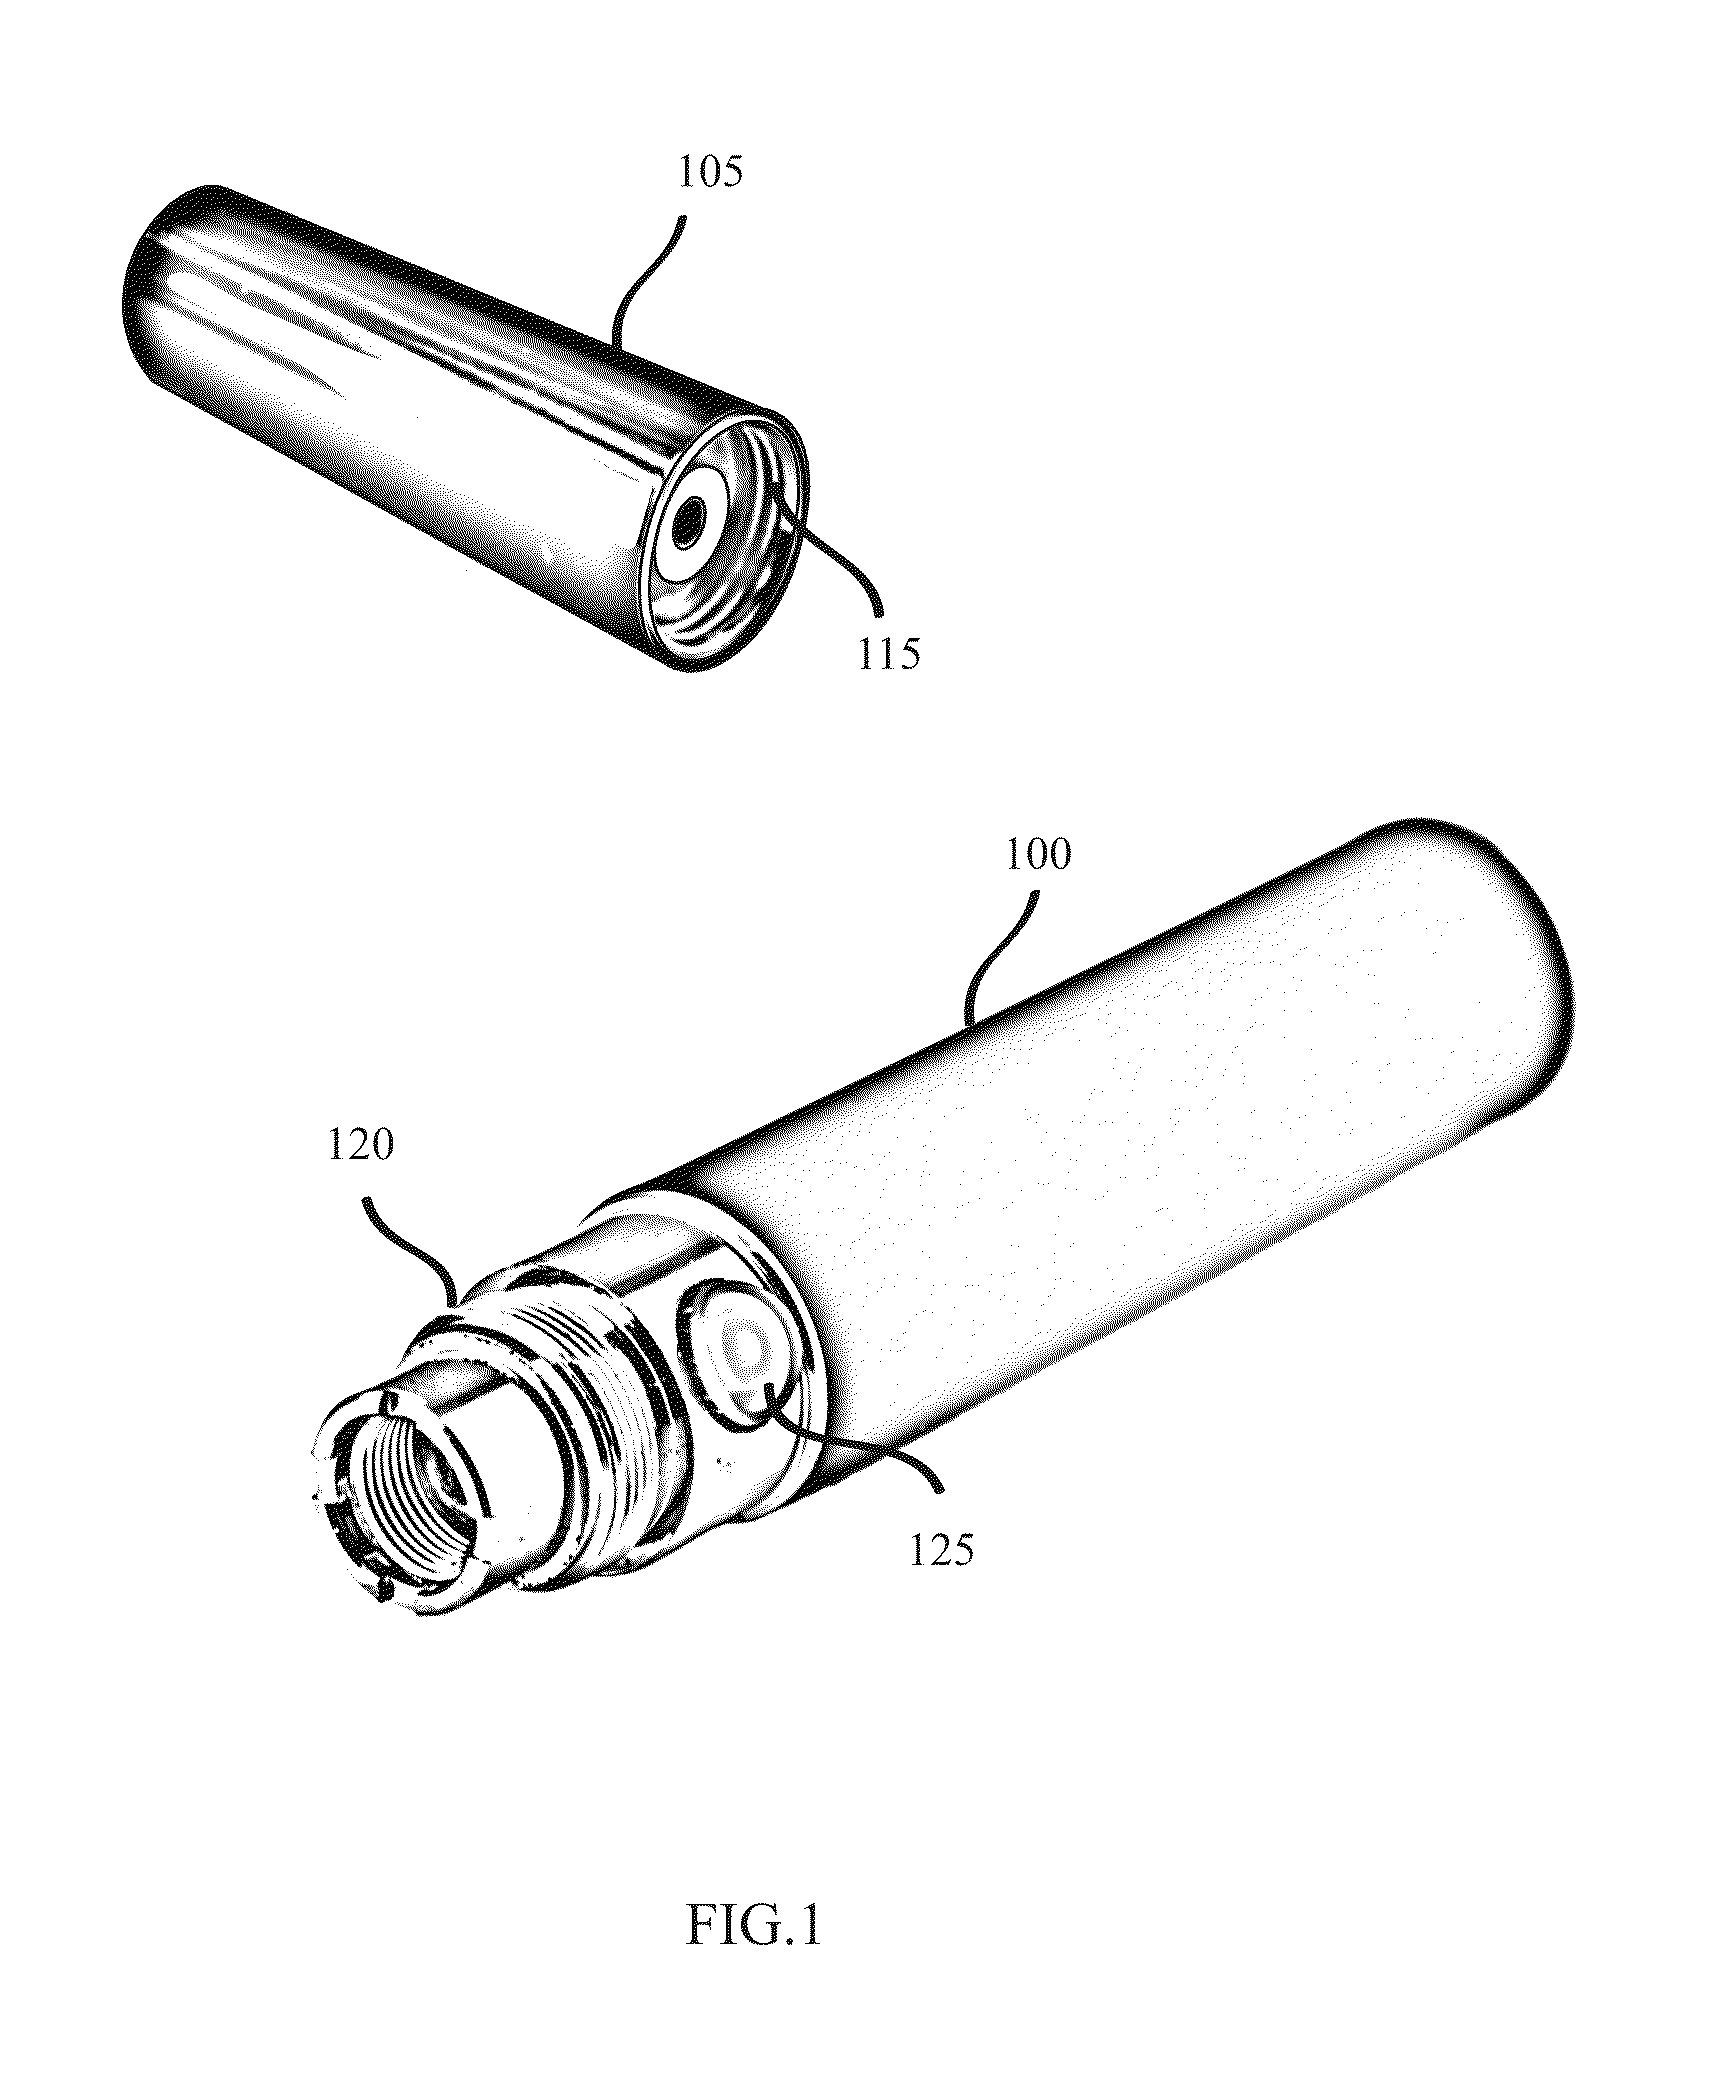 Electronic cigarette battery utility attachment system and method